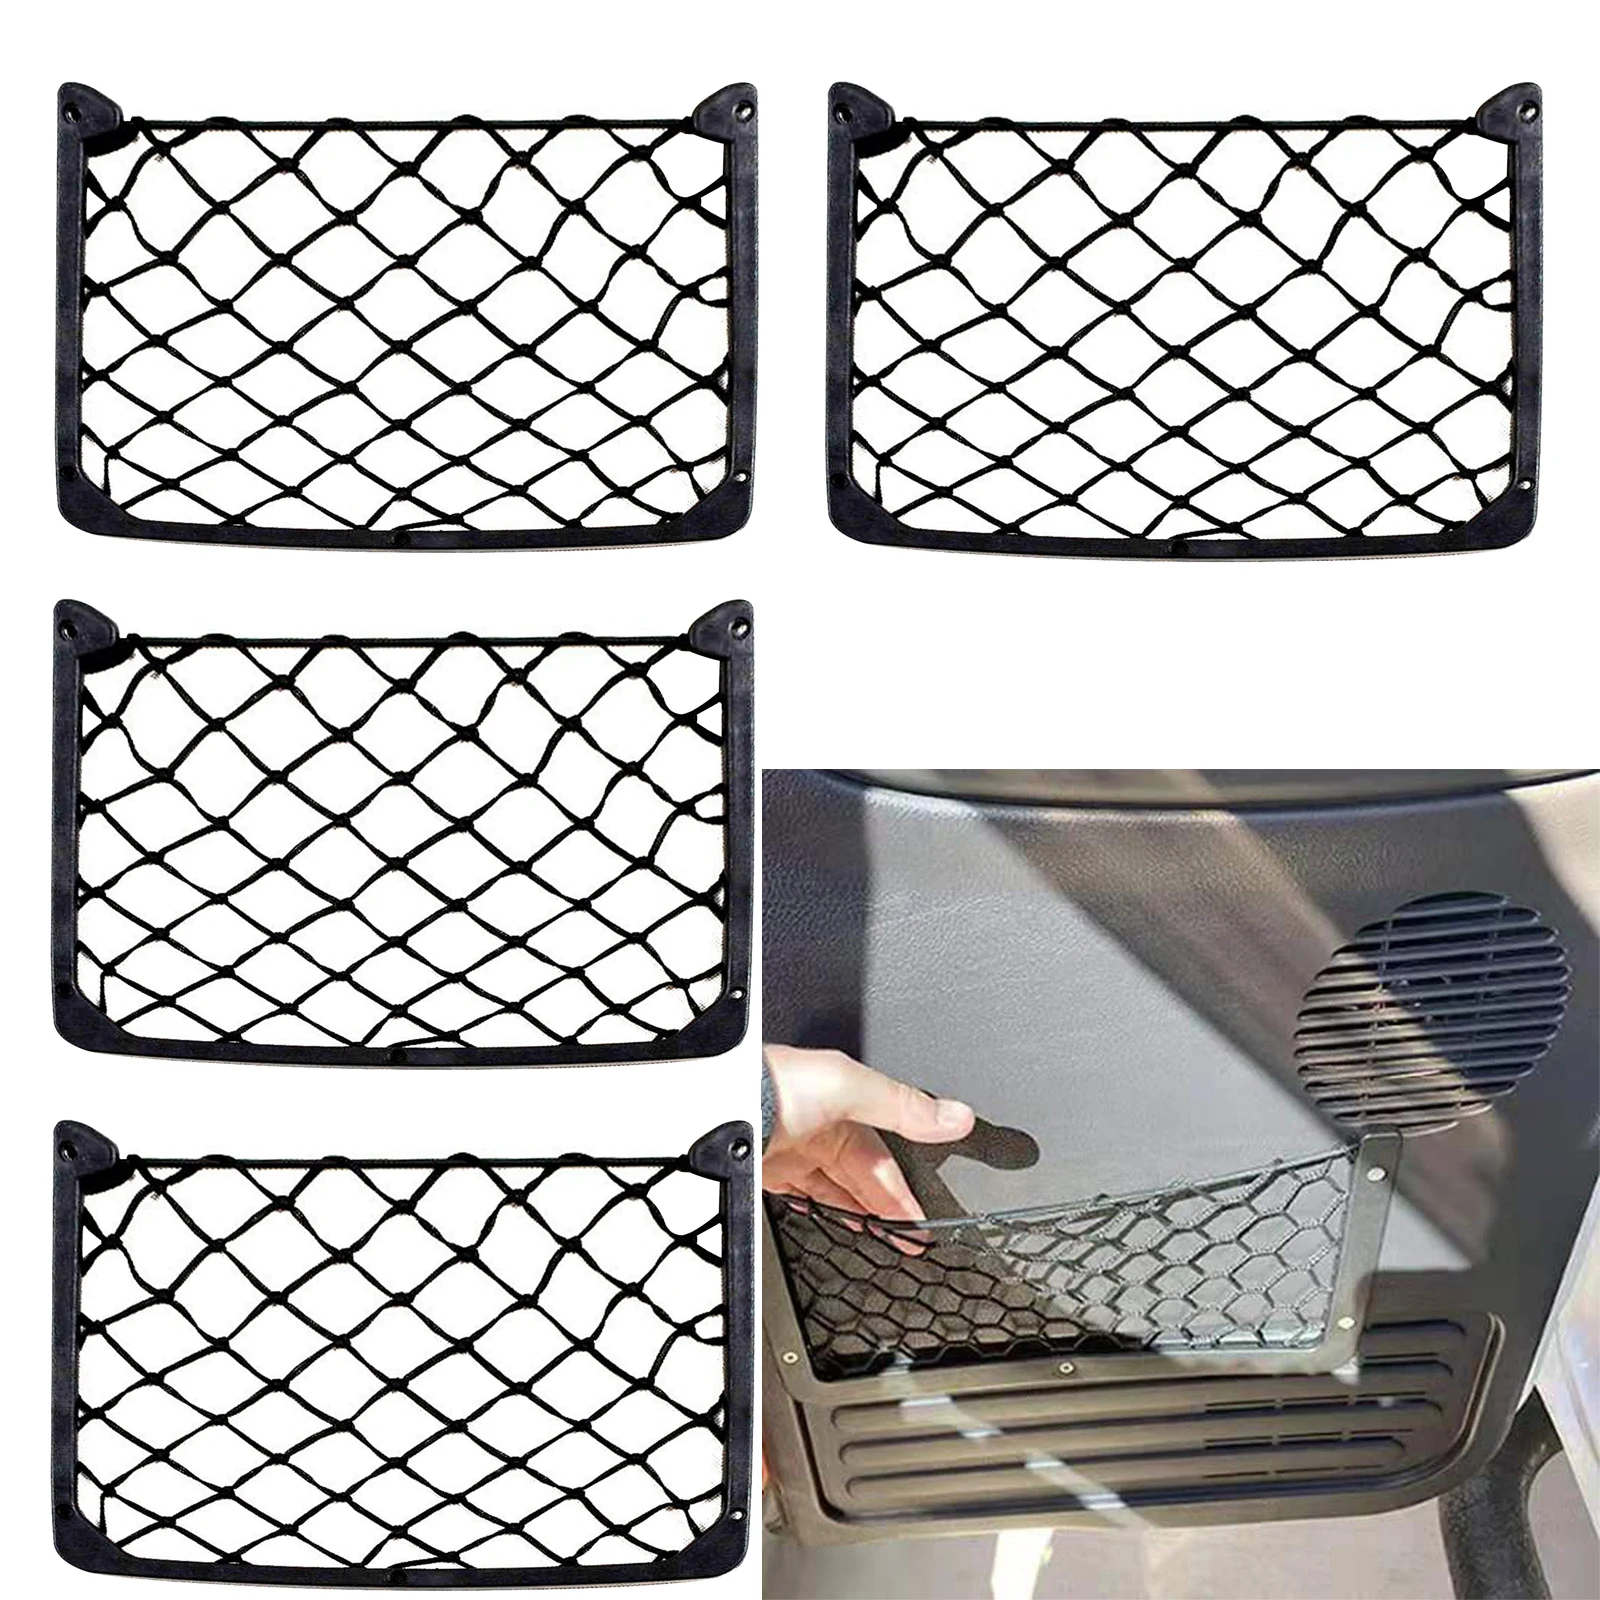 Car Storage Net Large Size ABS Plastic Netting Bag for Car Frame Stretch Mesh Net Universal Cargo with Screws for RV Car Trunk 27pcs set bga reballing rework net universal steel mesh welding template mesh directly heat chip replace repair heating mold